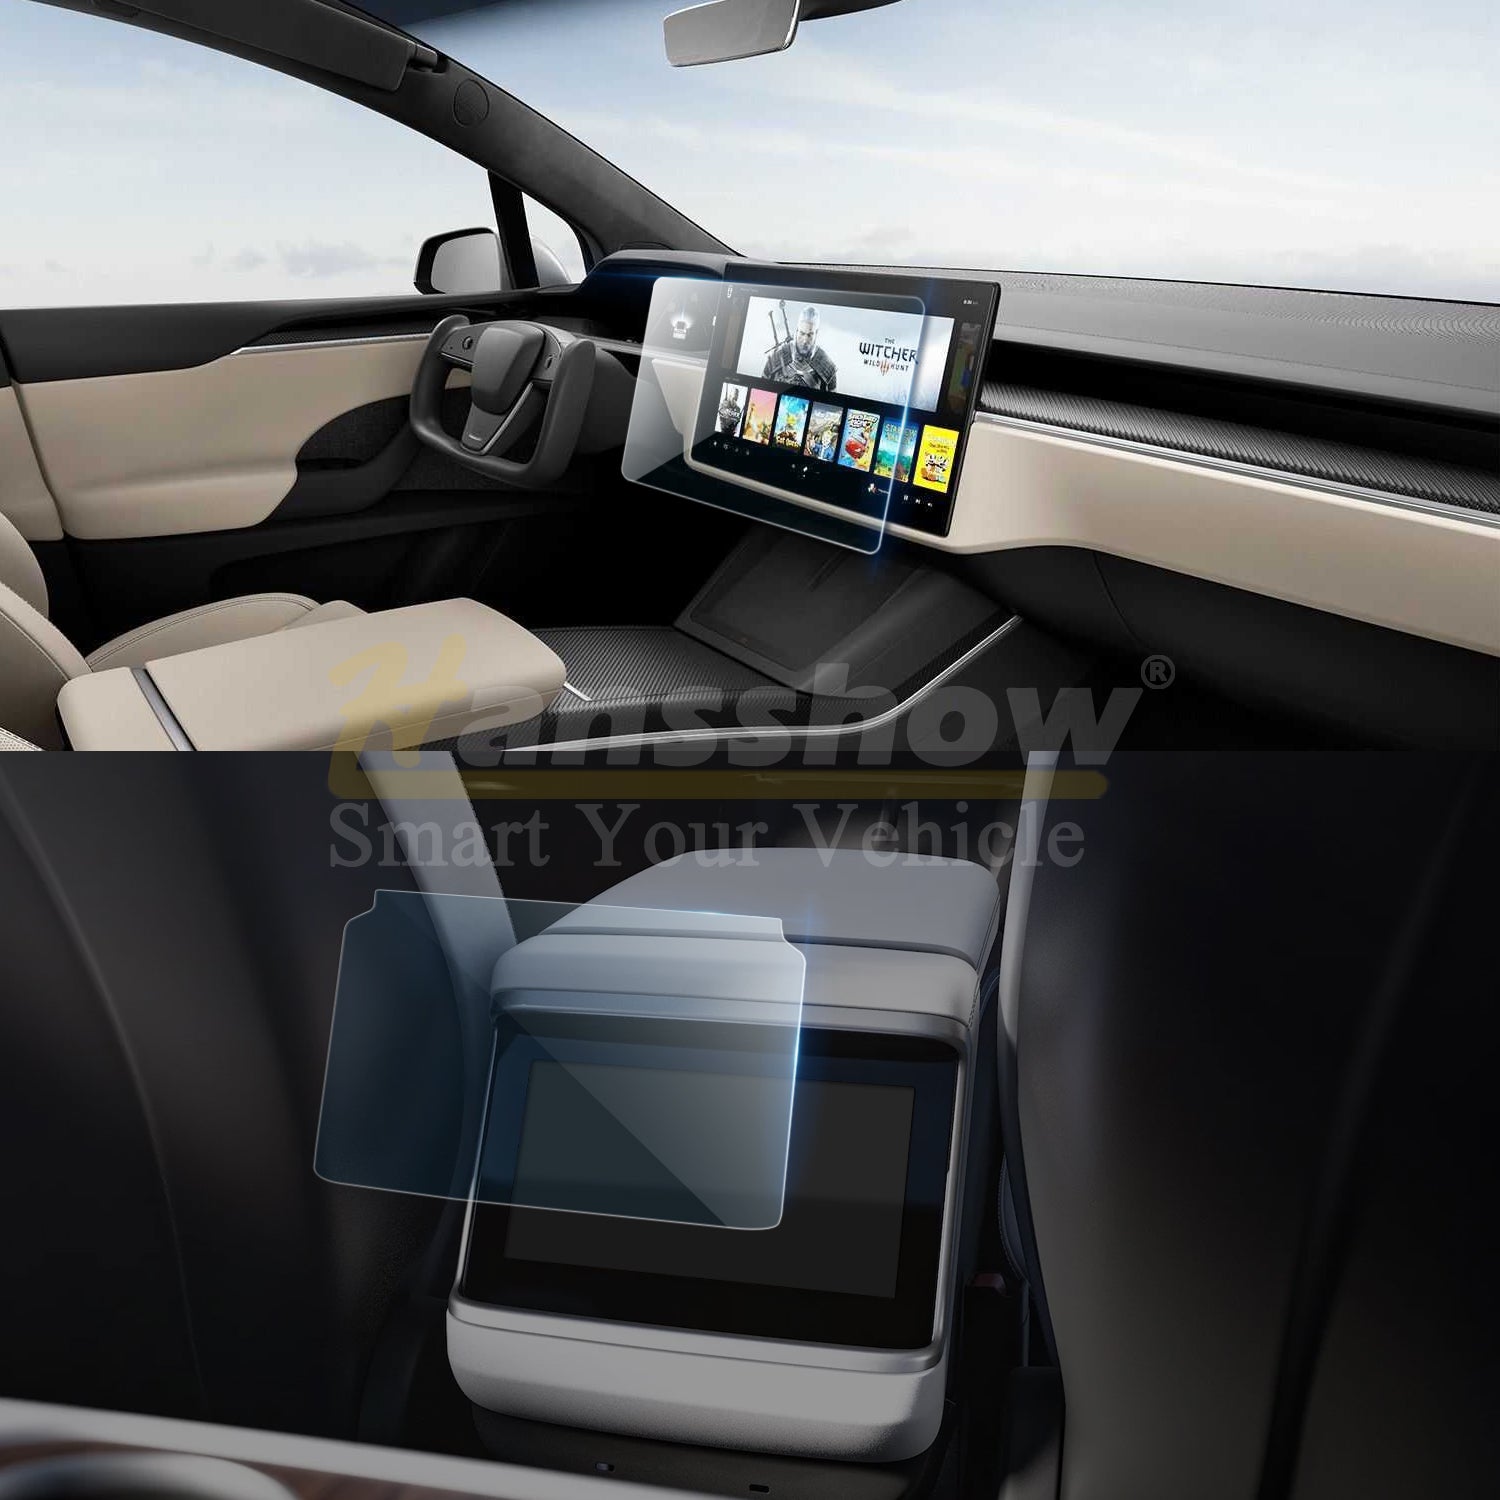 Model X rear seat touch screen Tempered Glass Screen Protector